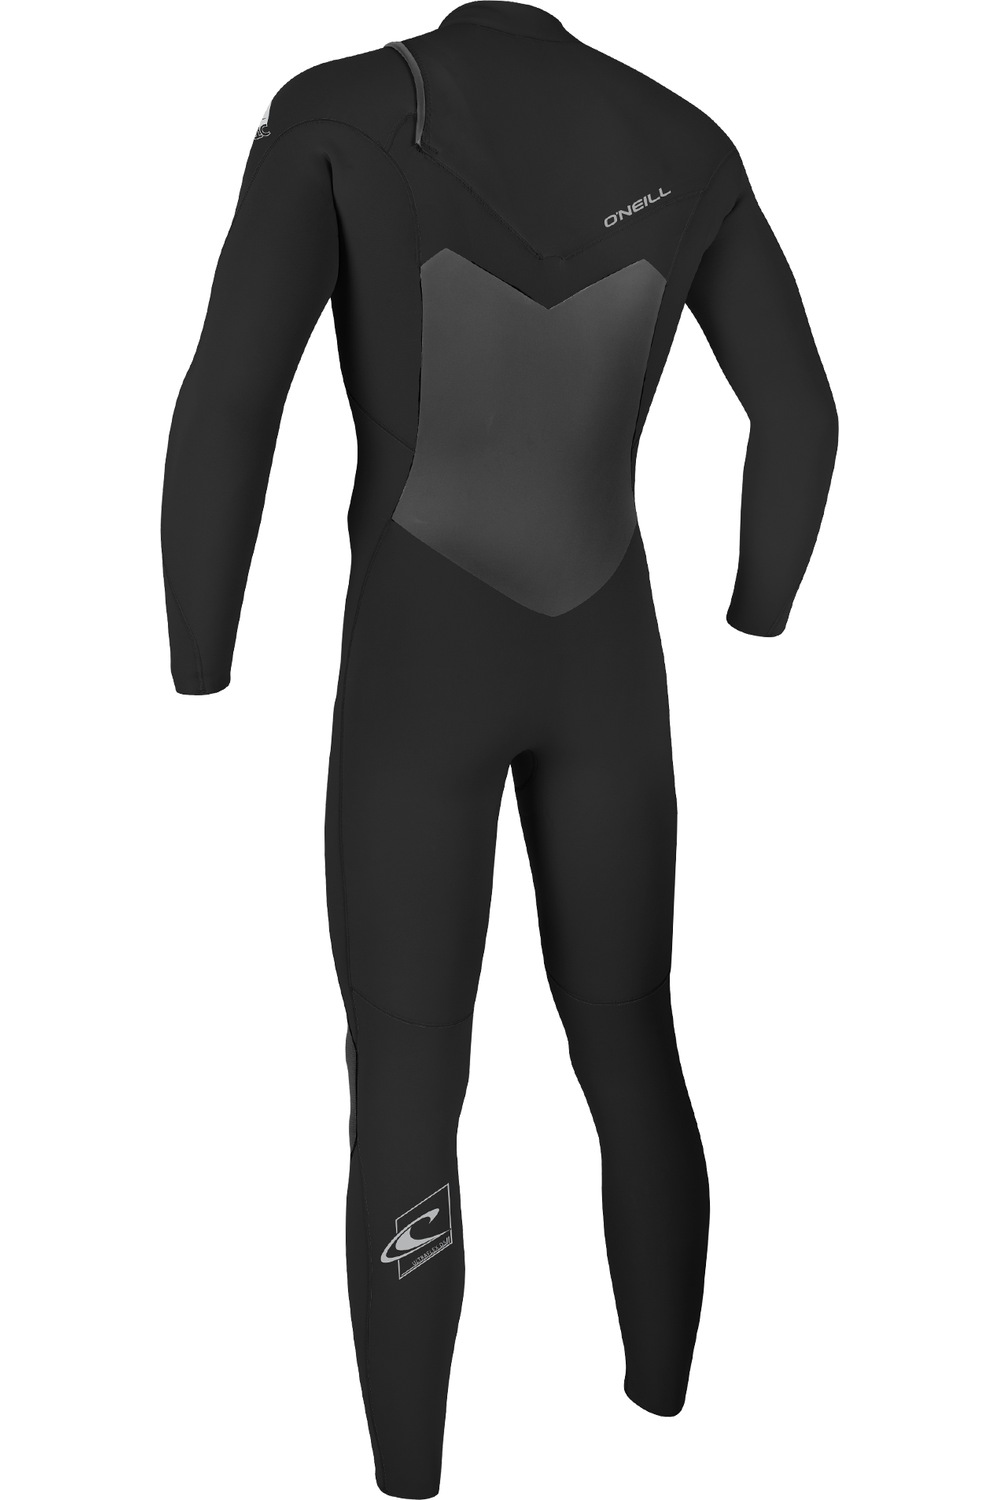 O'Neill Epic Wetsuit 4/3 With Chest Zip - Black